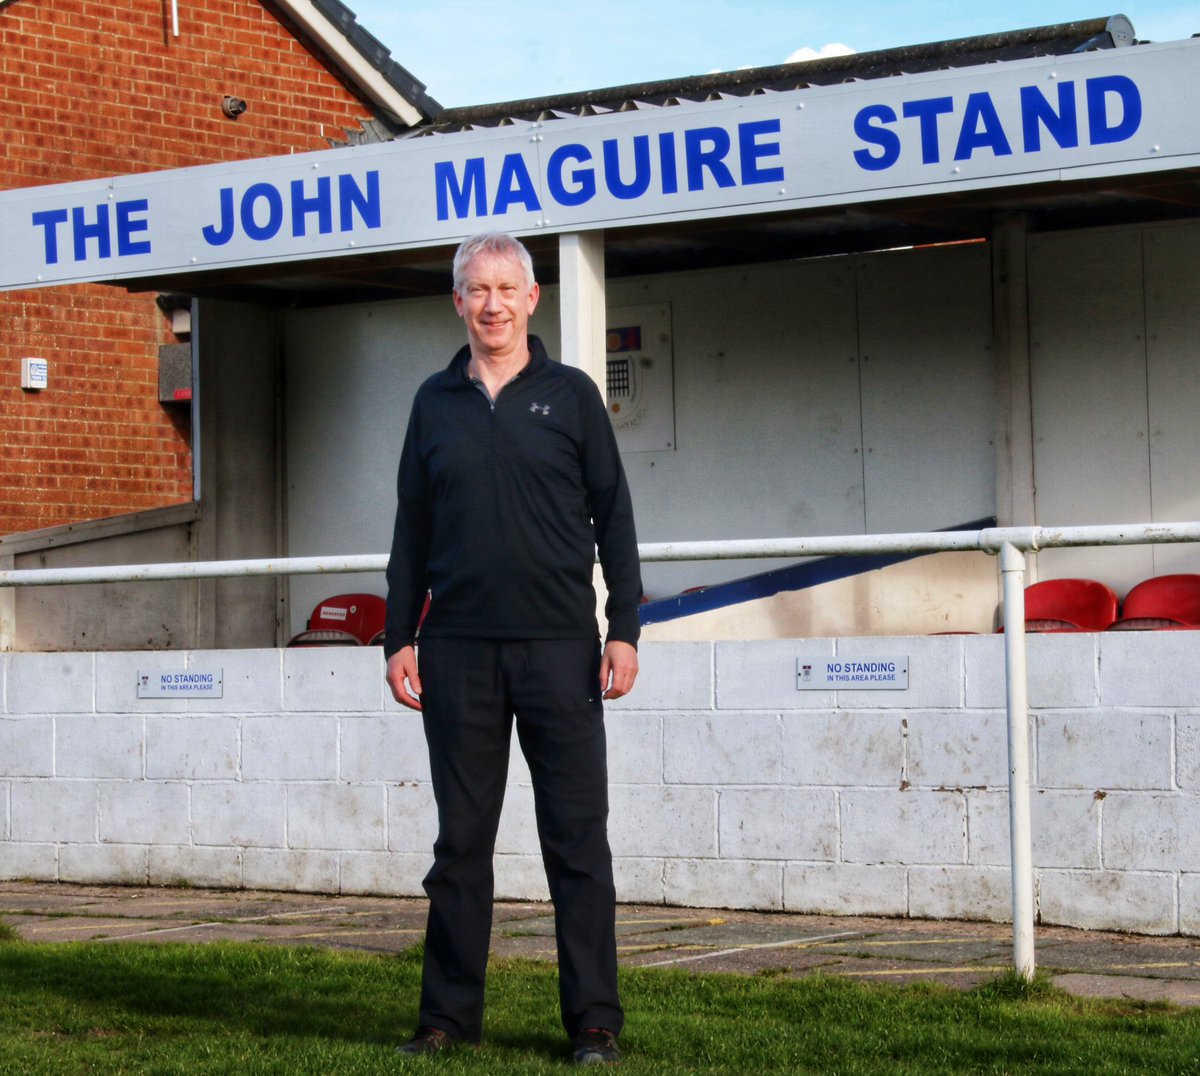 🎉 Join us in wishing a very 𝐡𝐚𝐩𝐩𝐲 𝐛𝐢𝐫𝐭𝐡𝐝𝐚𝐲 to the absolute legend that is John Maguire. Hope you’ve had a great day, Magsy! 🔷 #WeAreGate | 📸 @OLDBLUEFOX